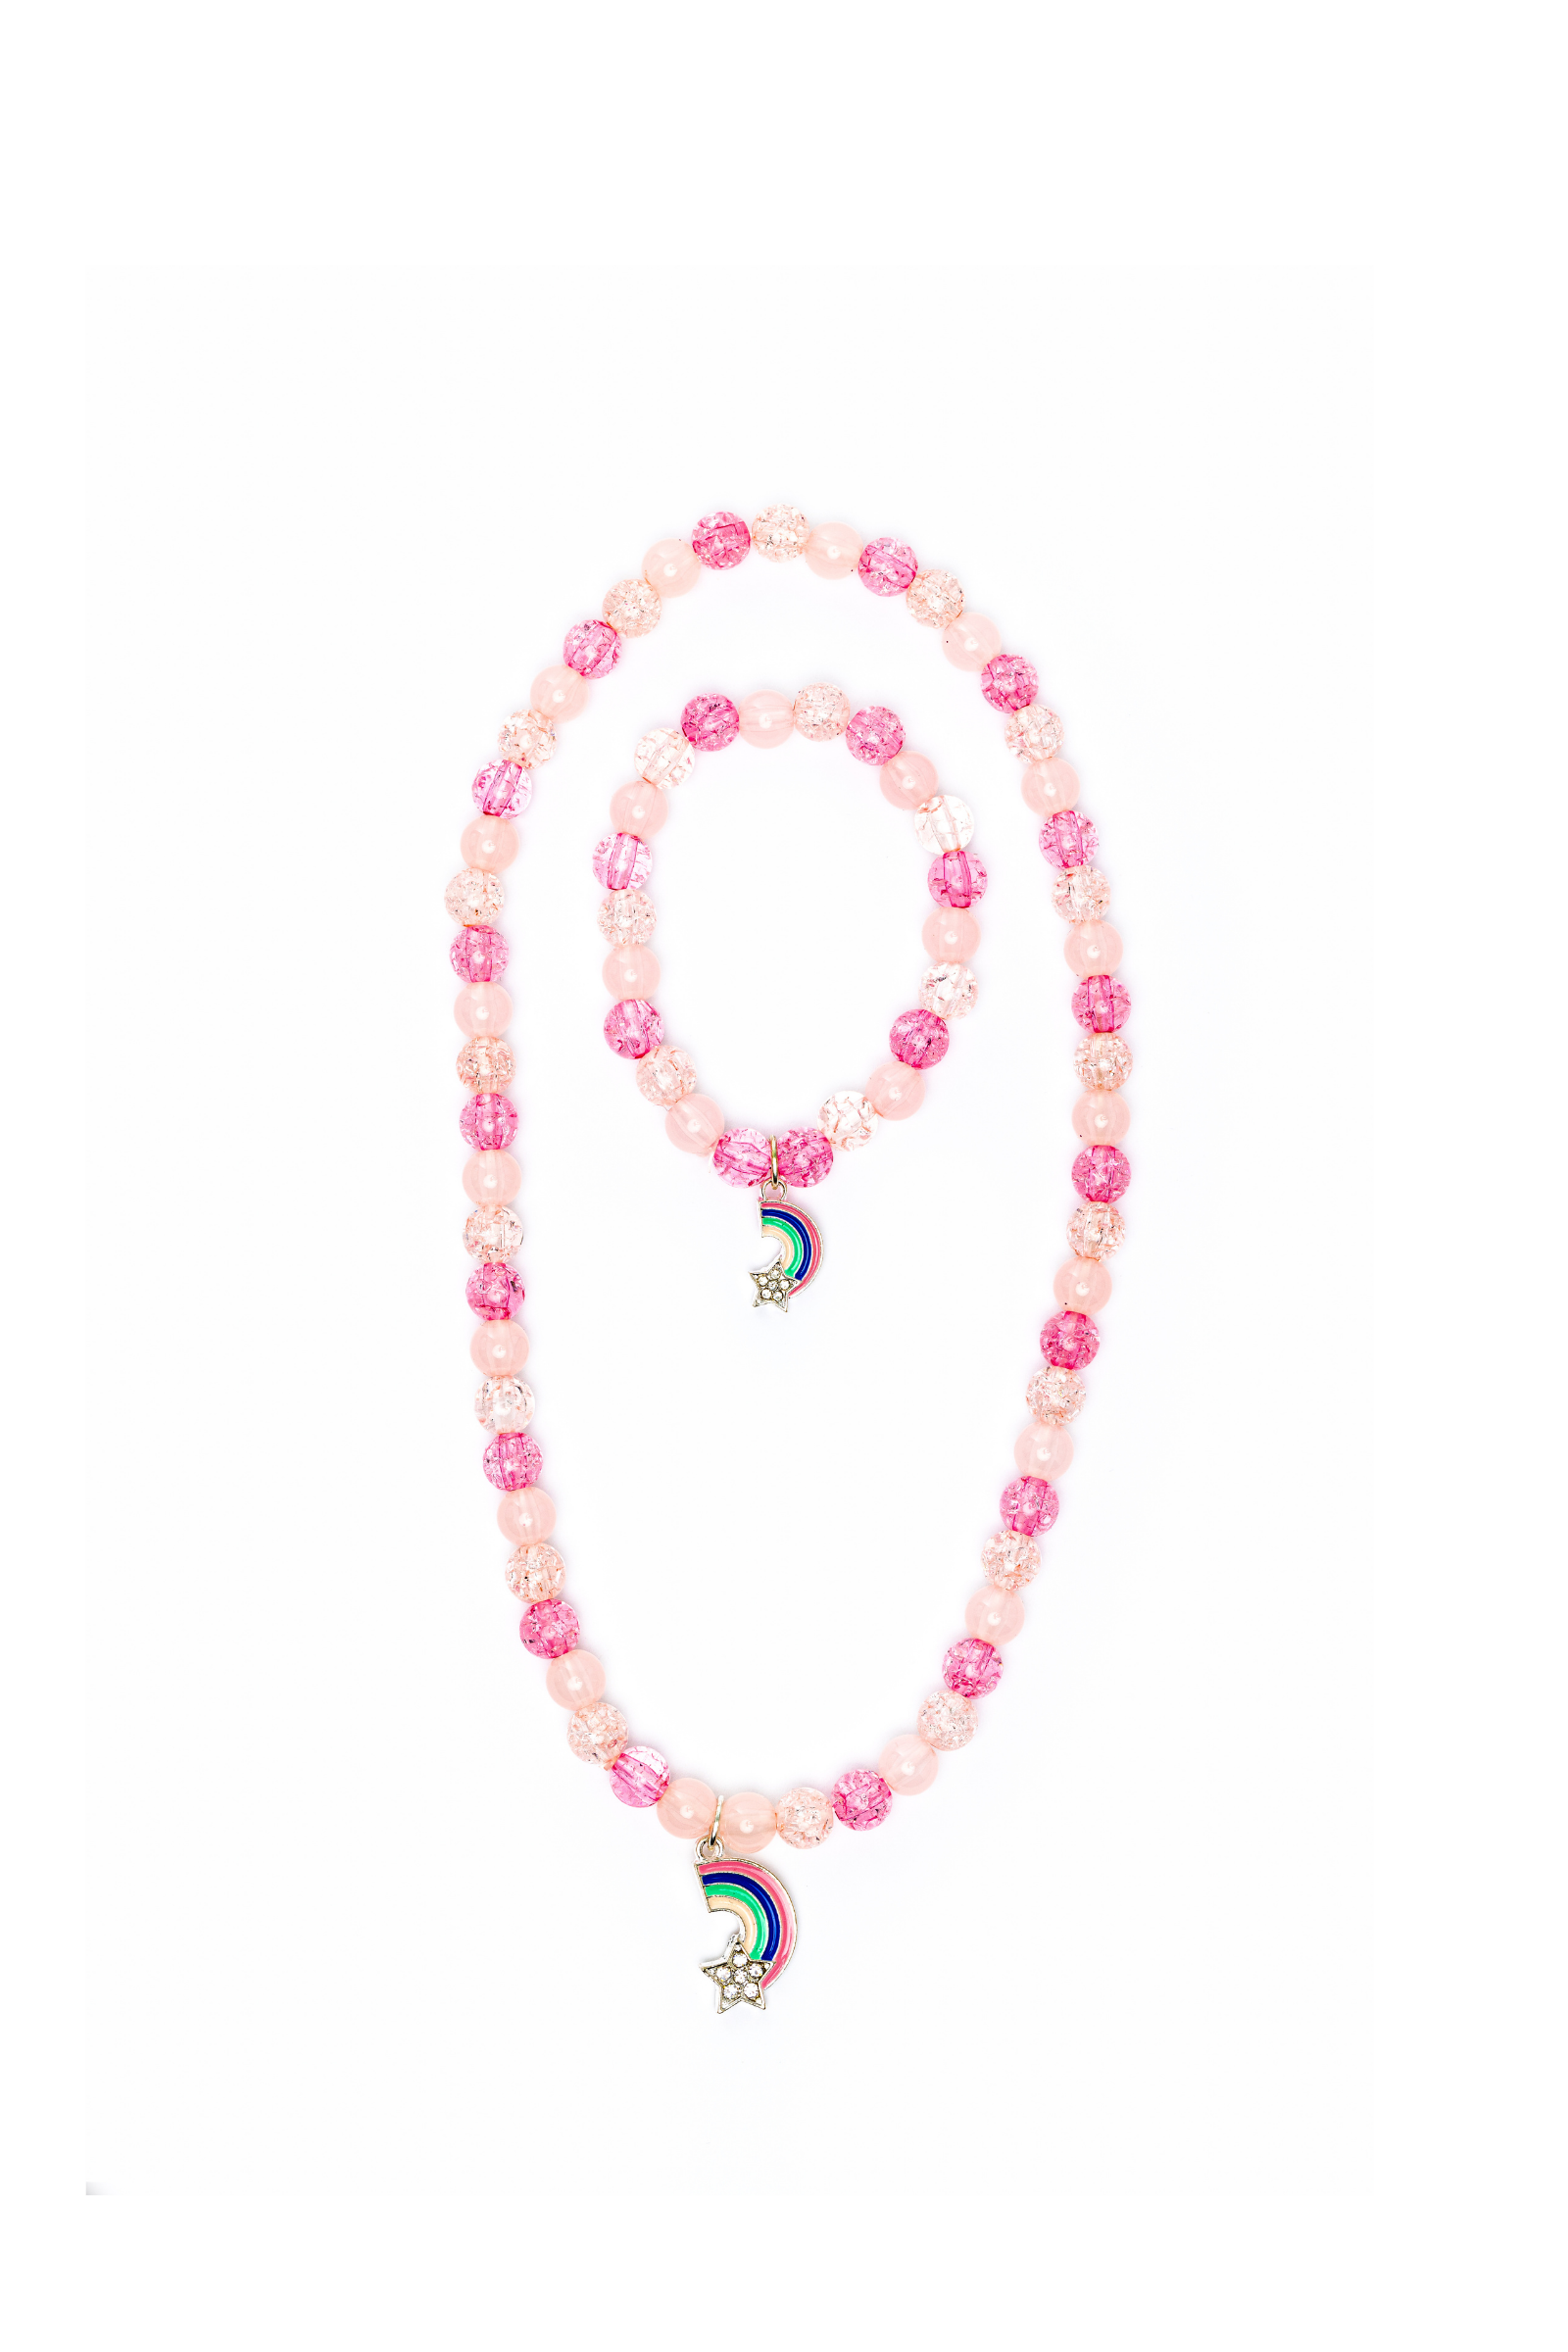 Sparkle Rainbow Necklace, Jewelry for Girls – Chasing Fireflies